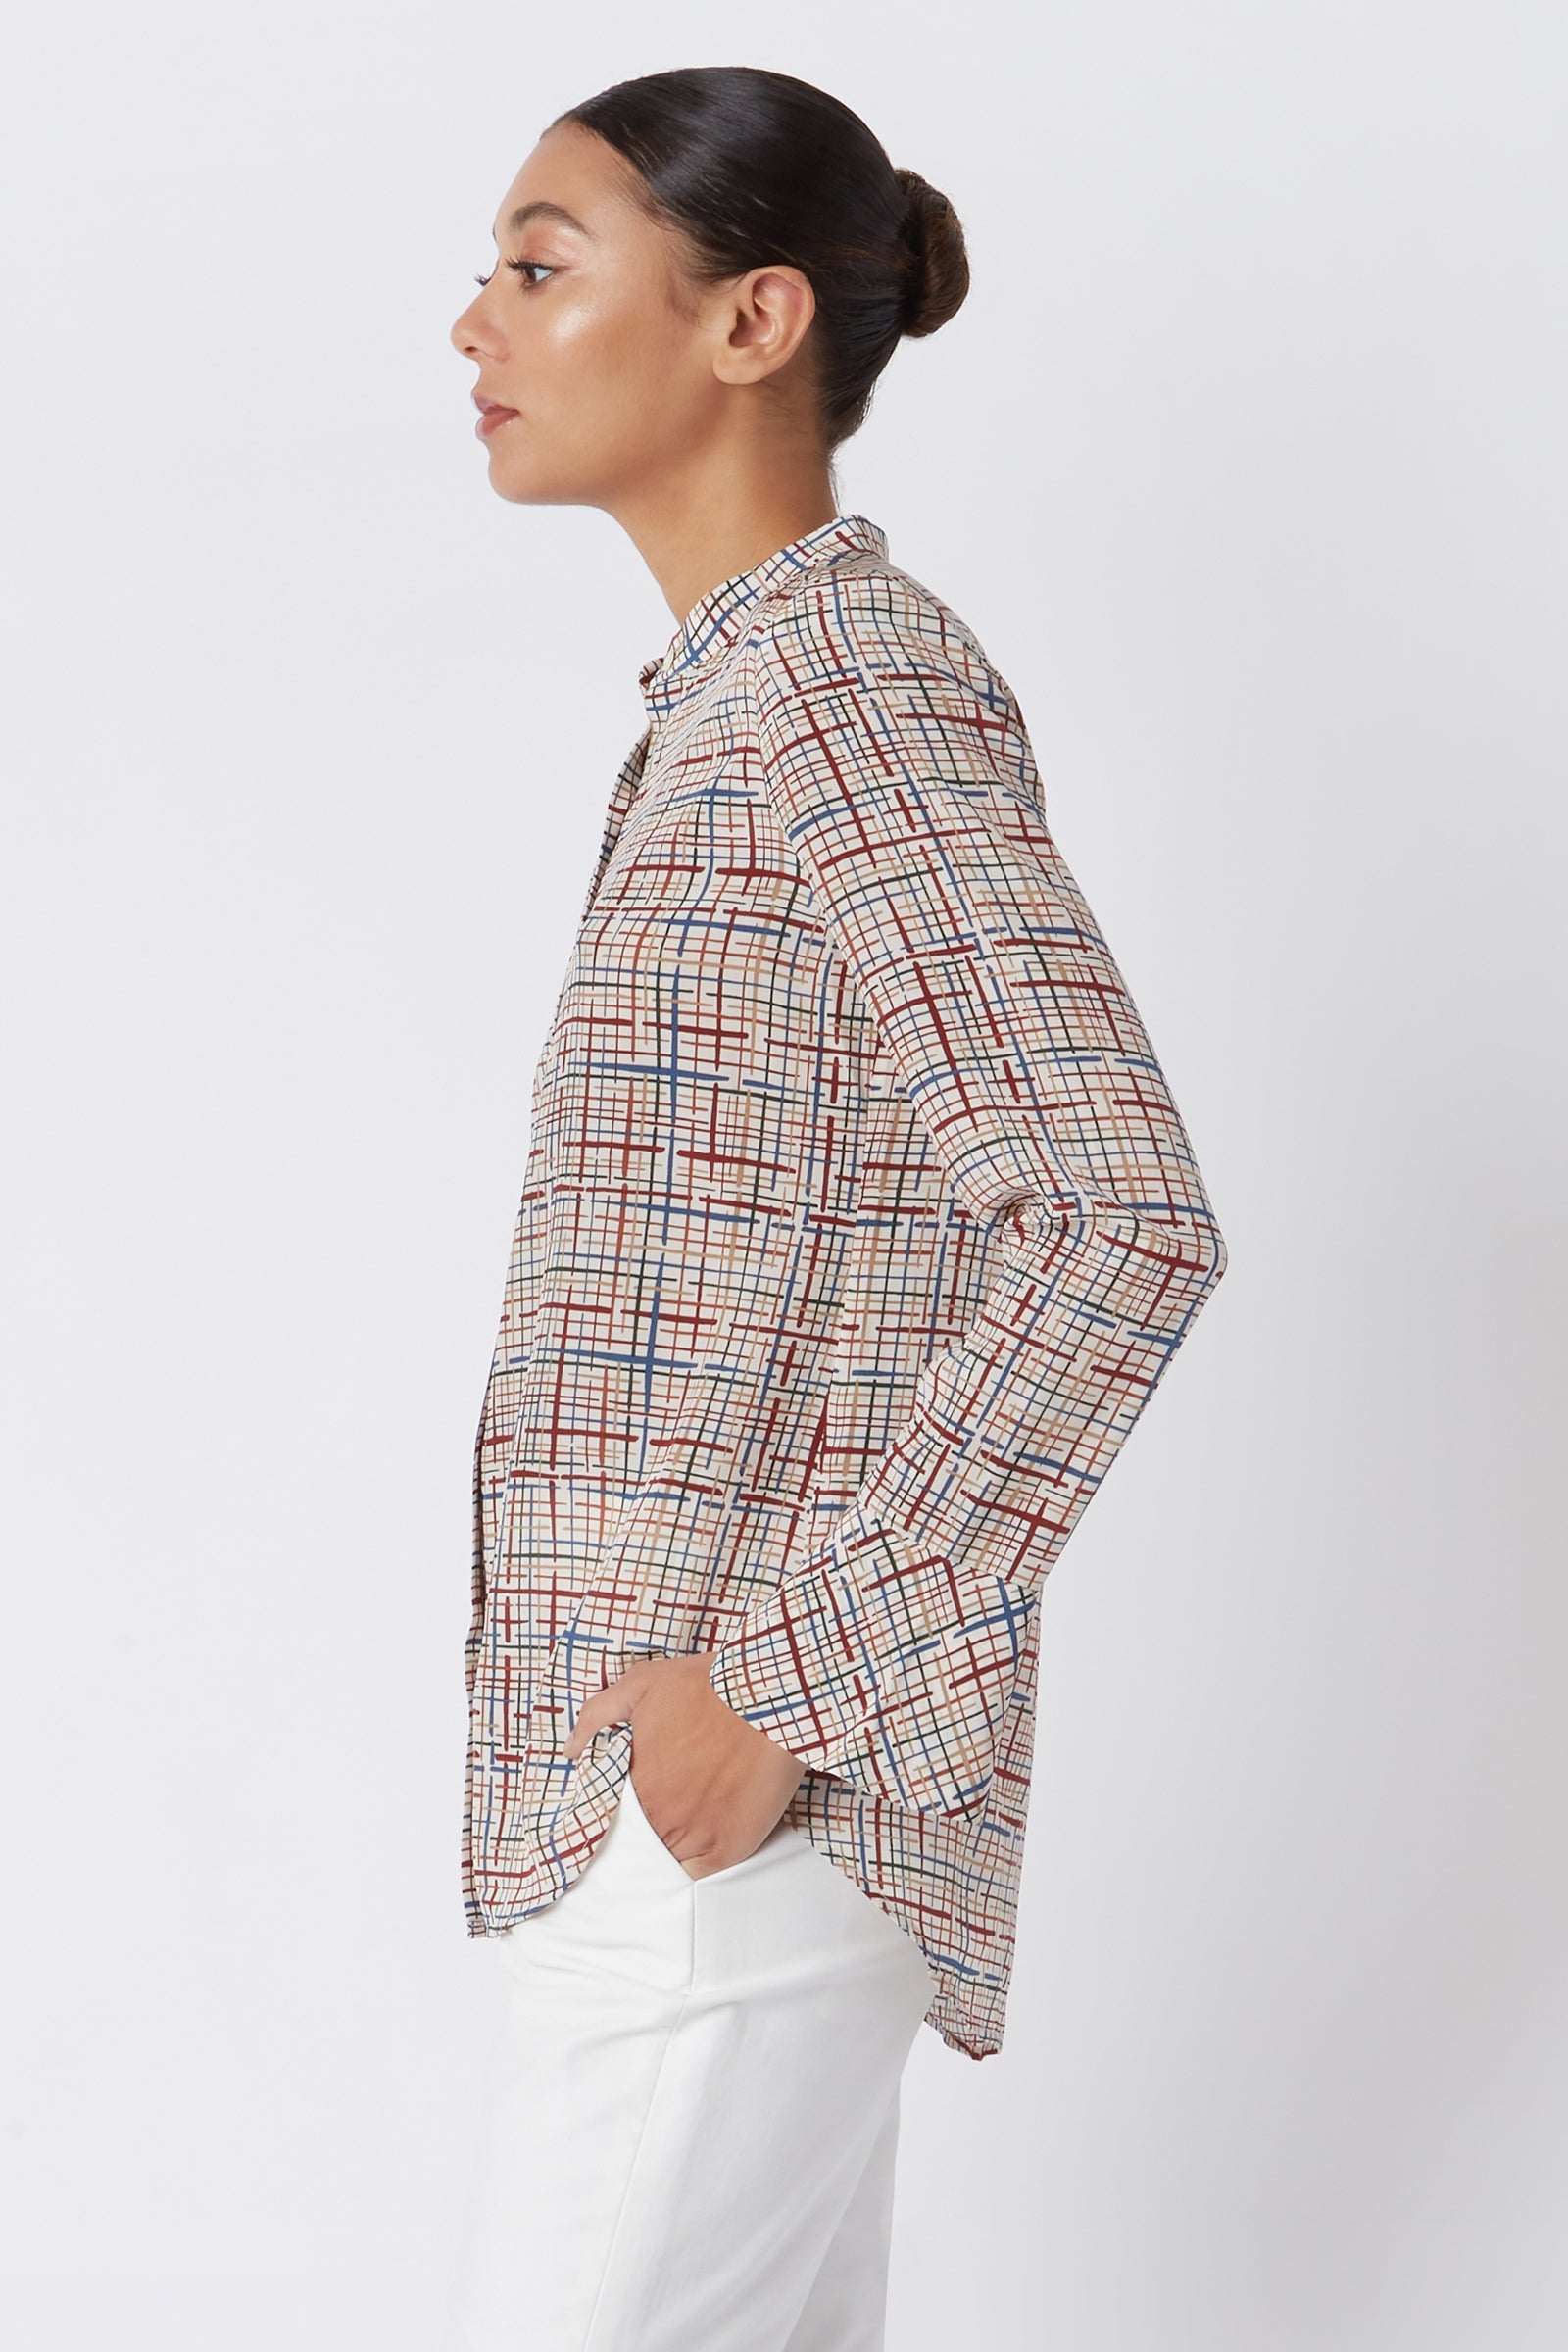 Kal Rieman Juliet Band Collar Blouse in Sketch Plaid on Model Cropped Side View